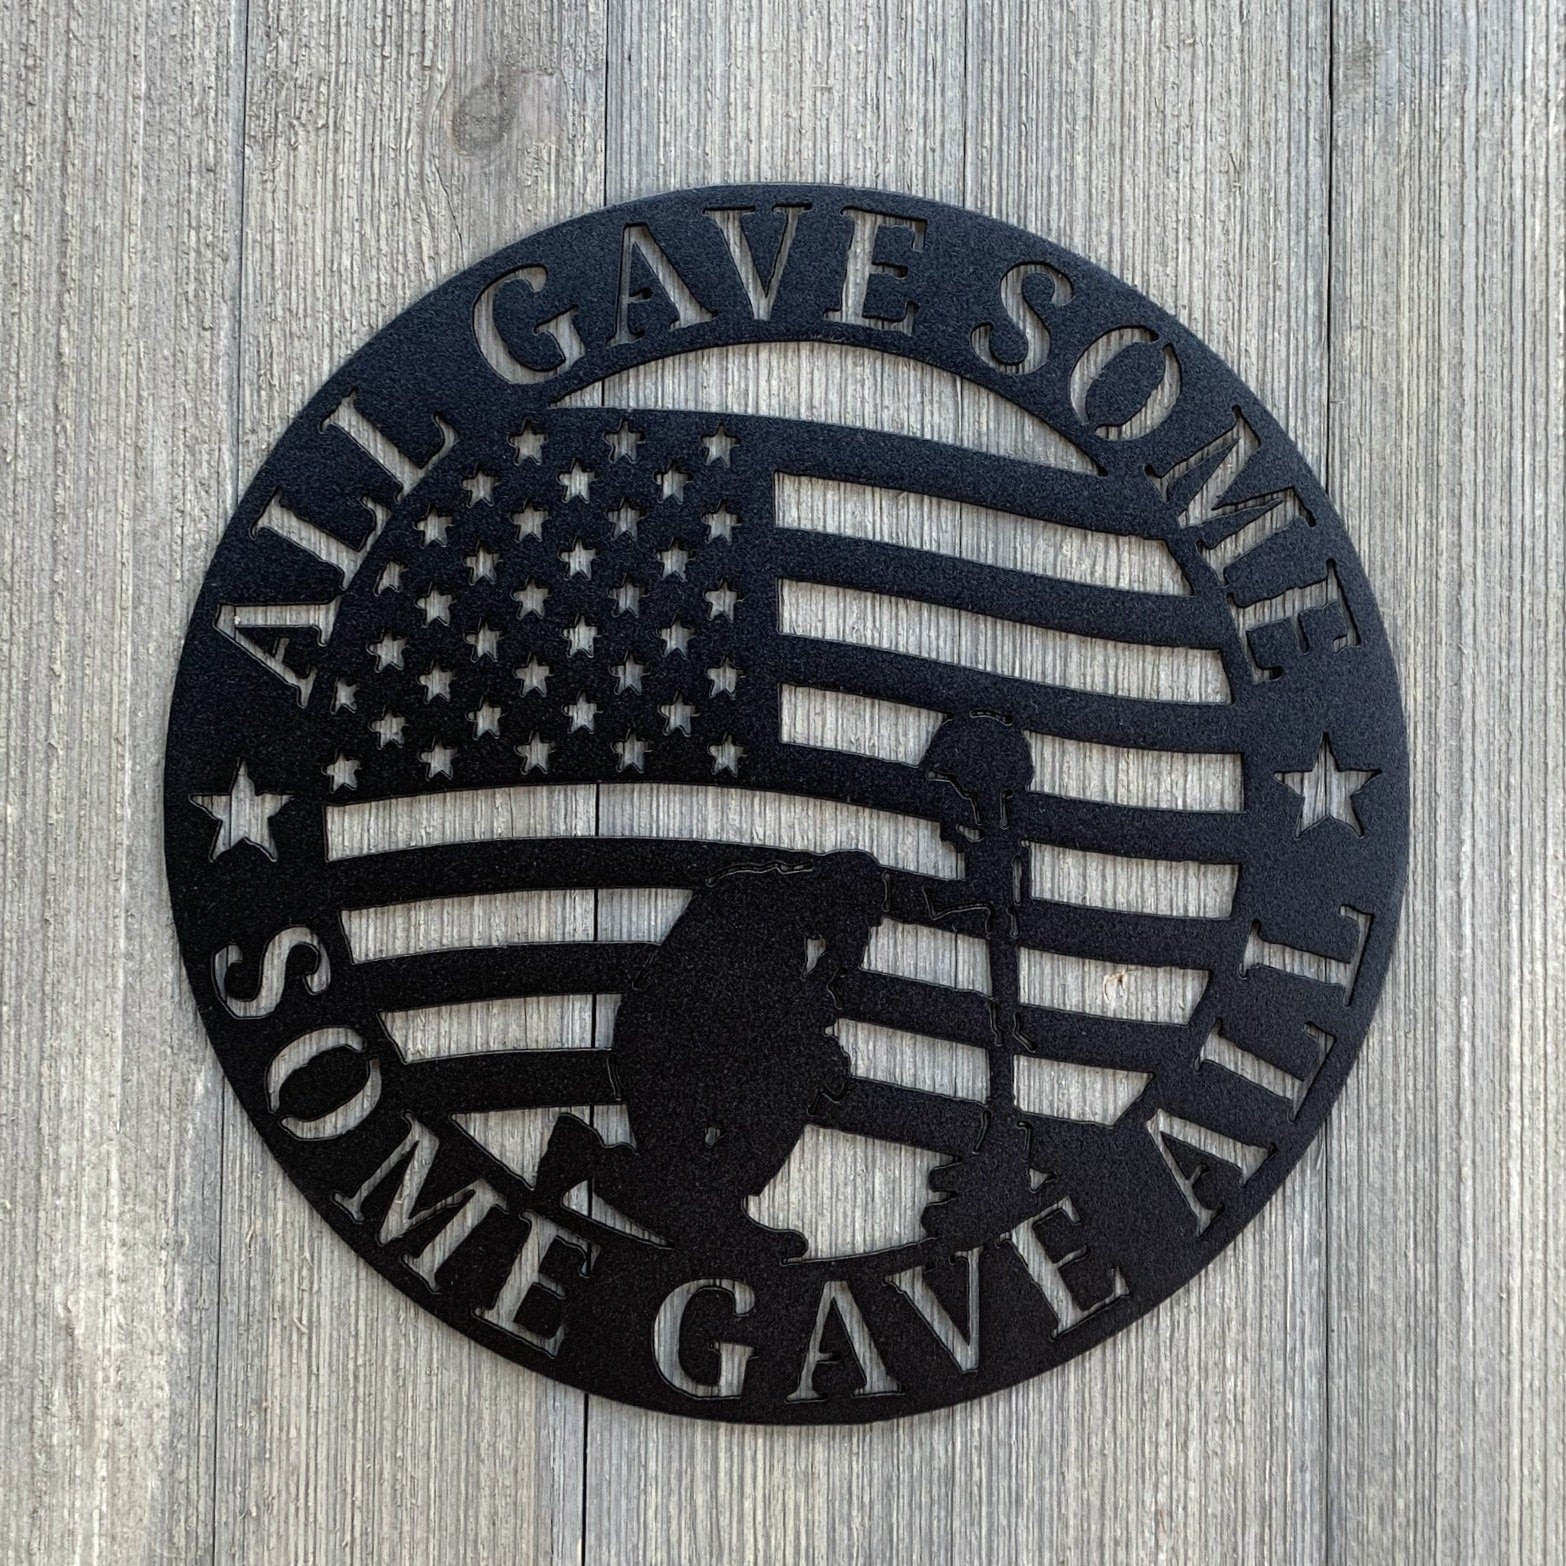 All Gave Some, Some Gave All Metal Sign Cutout, Cut Metal Sign, Wall Metal Art Laser Cut Metal Signs Custom Gift Ideas 12x12IN